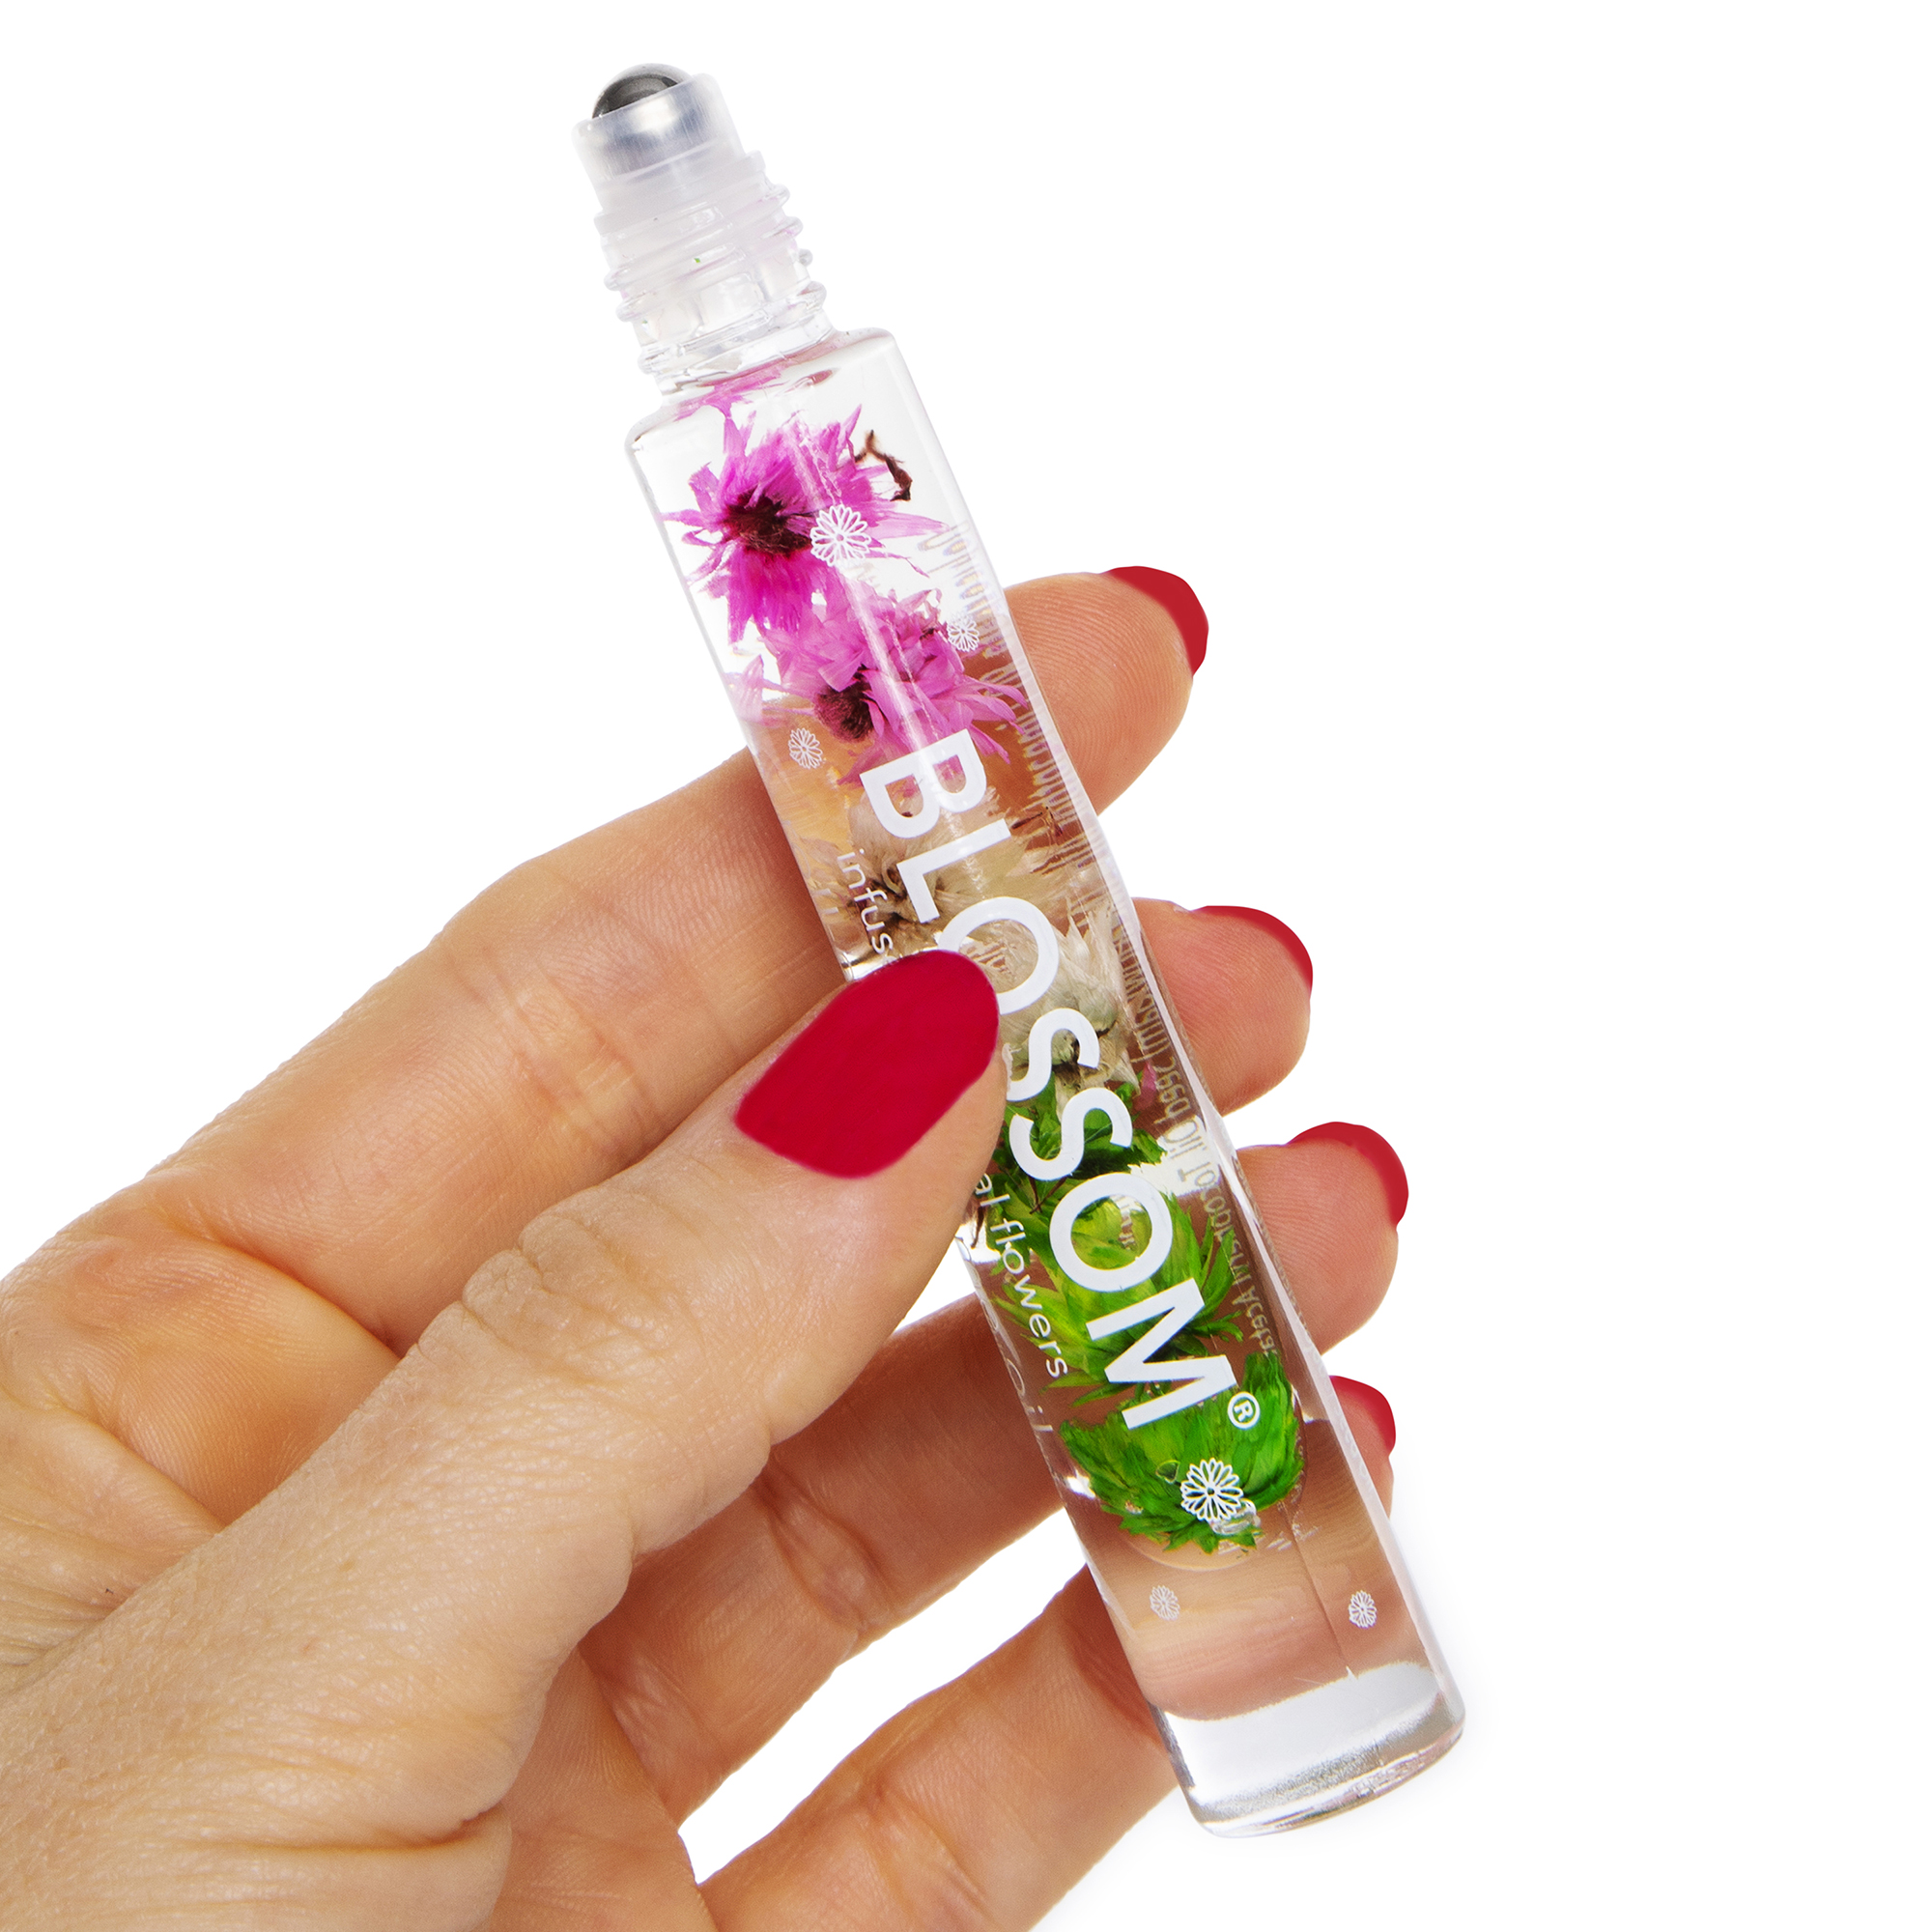 Blossom® Roll-On Fragrance Oil infused W/ Real Flowers